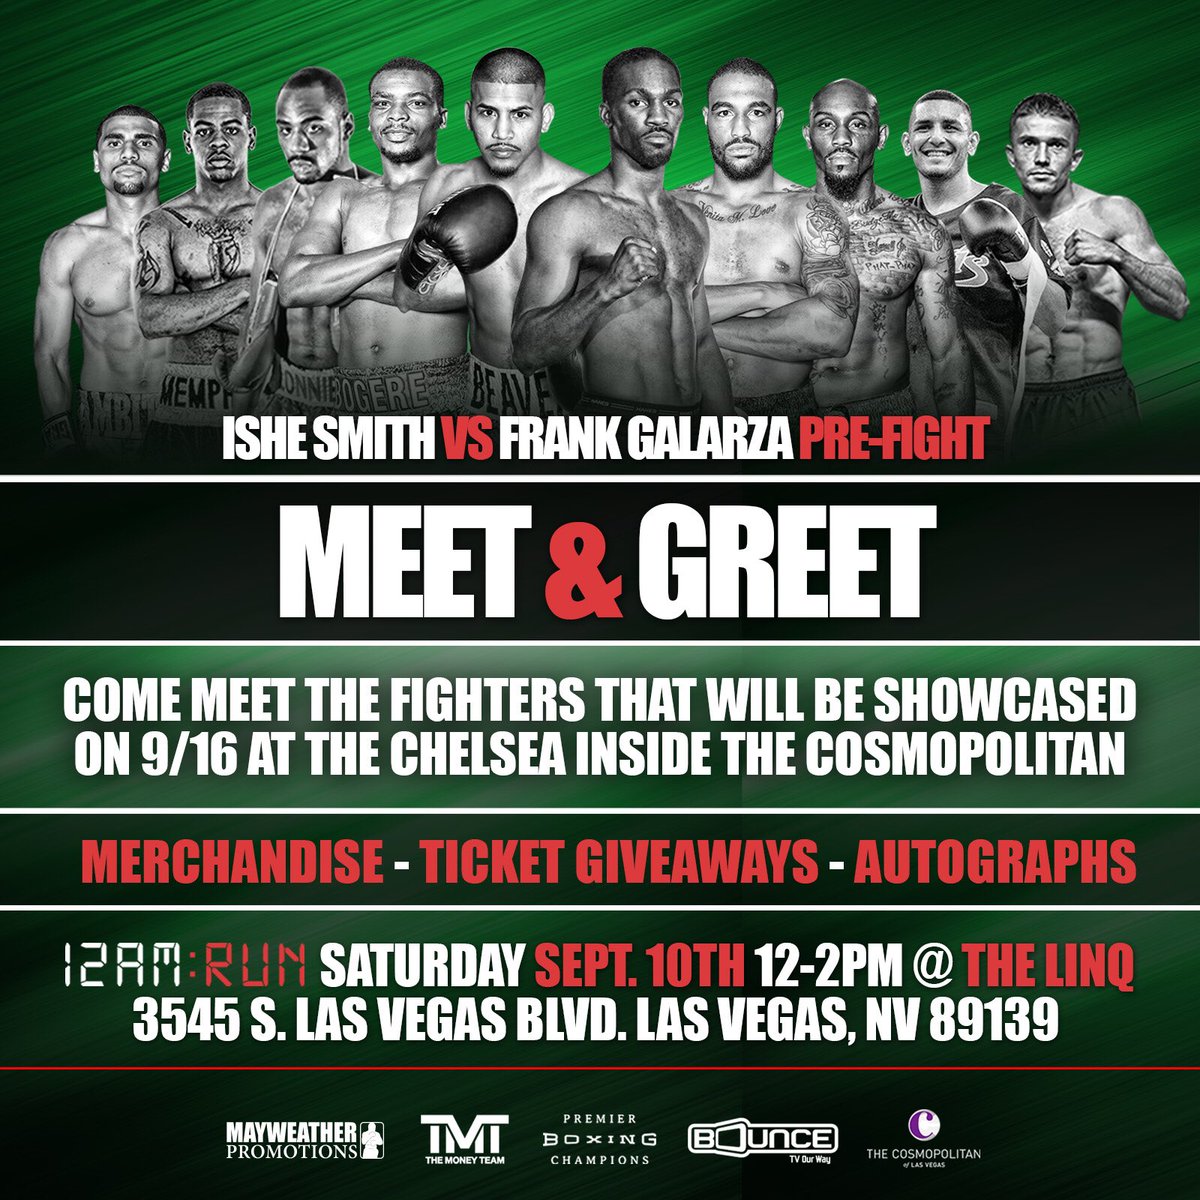 RT @MayweatherPromo: TODAY! Las Vegas it's going down, @12amRun is the place to be. Meet the 9/16 stars + giveaways & more ????! #XIIAM ???????? htt…